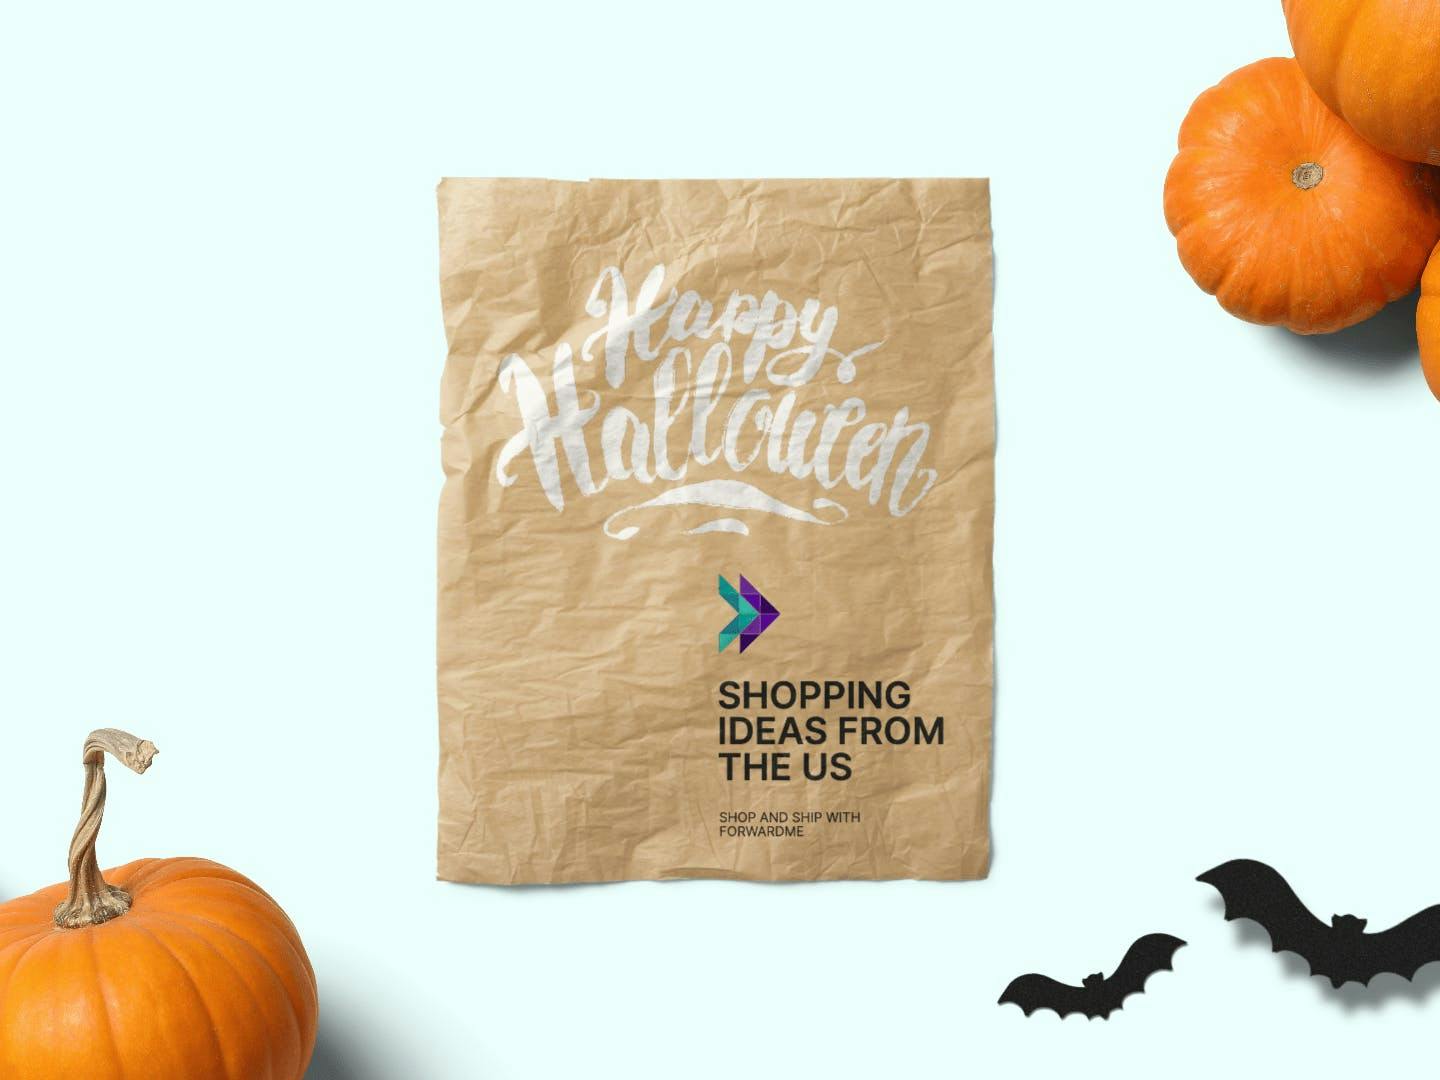 Forwardme ships Halloween items from the US